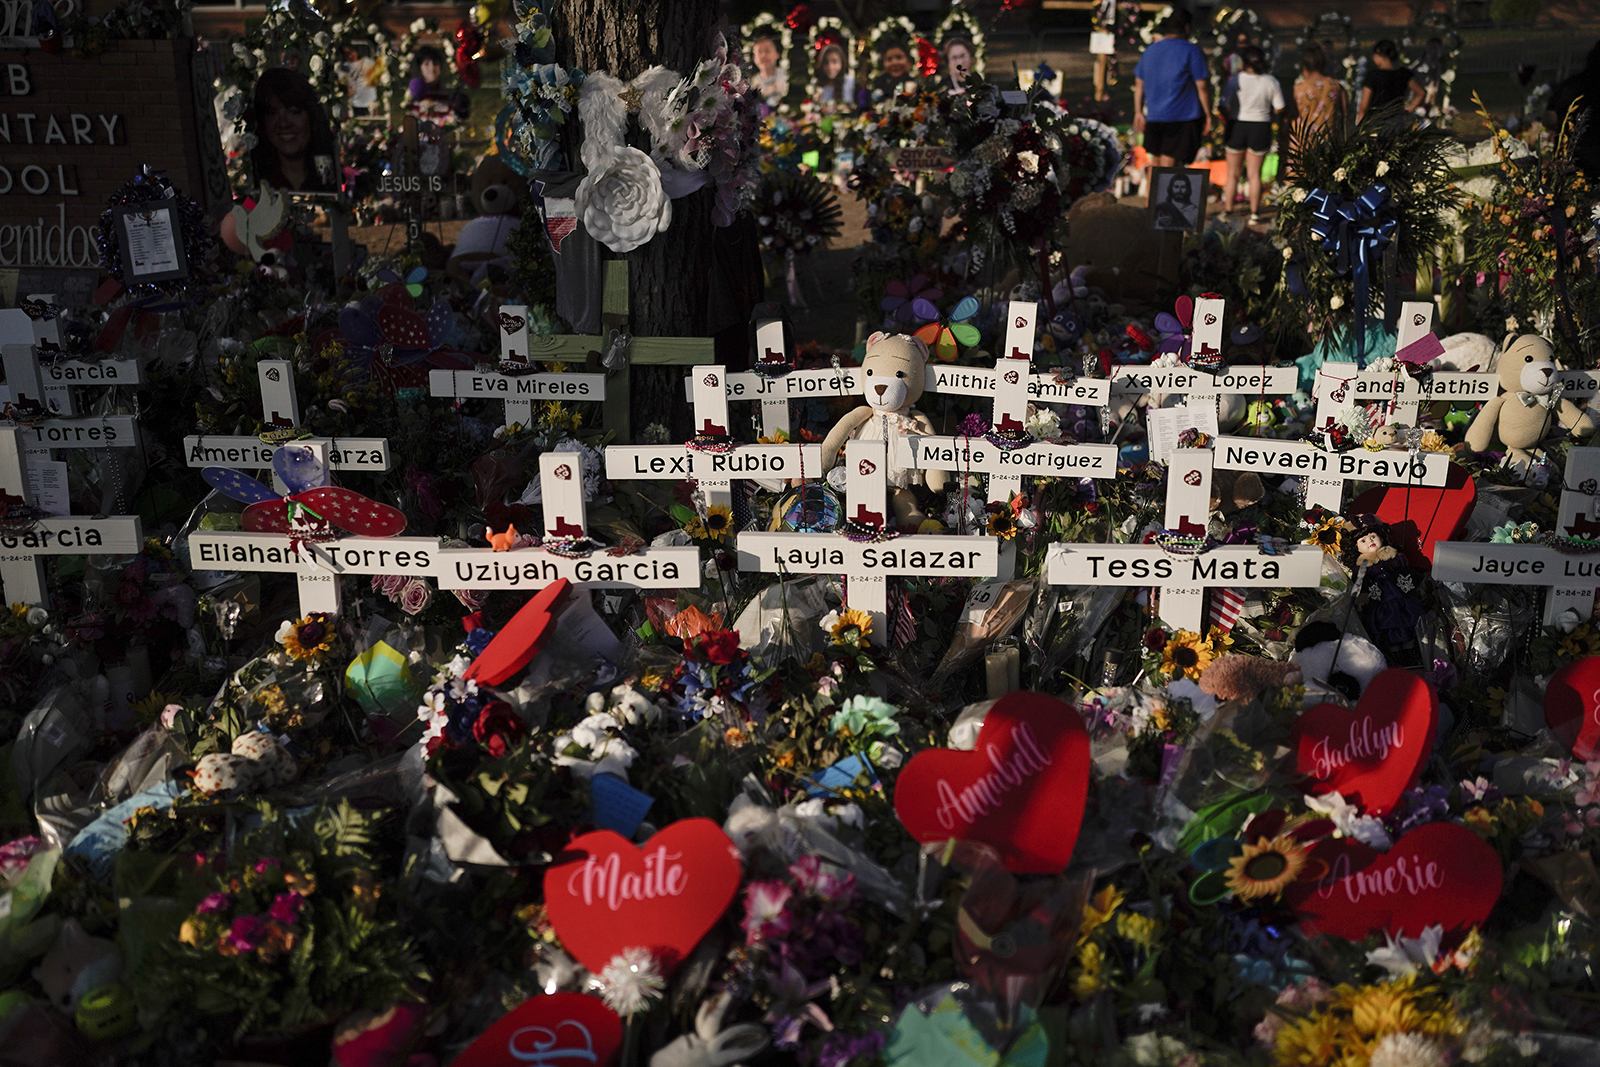 Flowers are piled around crosses with the names of the victims killed in last week's school shooting as people visit a memorial at Robb Elementary School to pay their respects, Tuesday, May 31, 2022, in Uvalde, Texas. (AP Photo/Jae C. Hong)